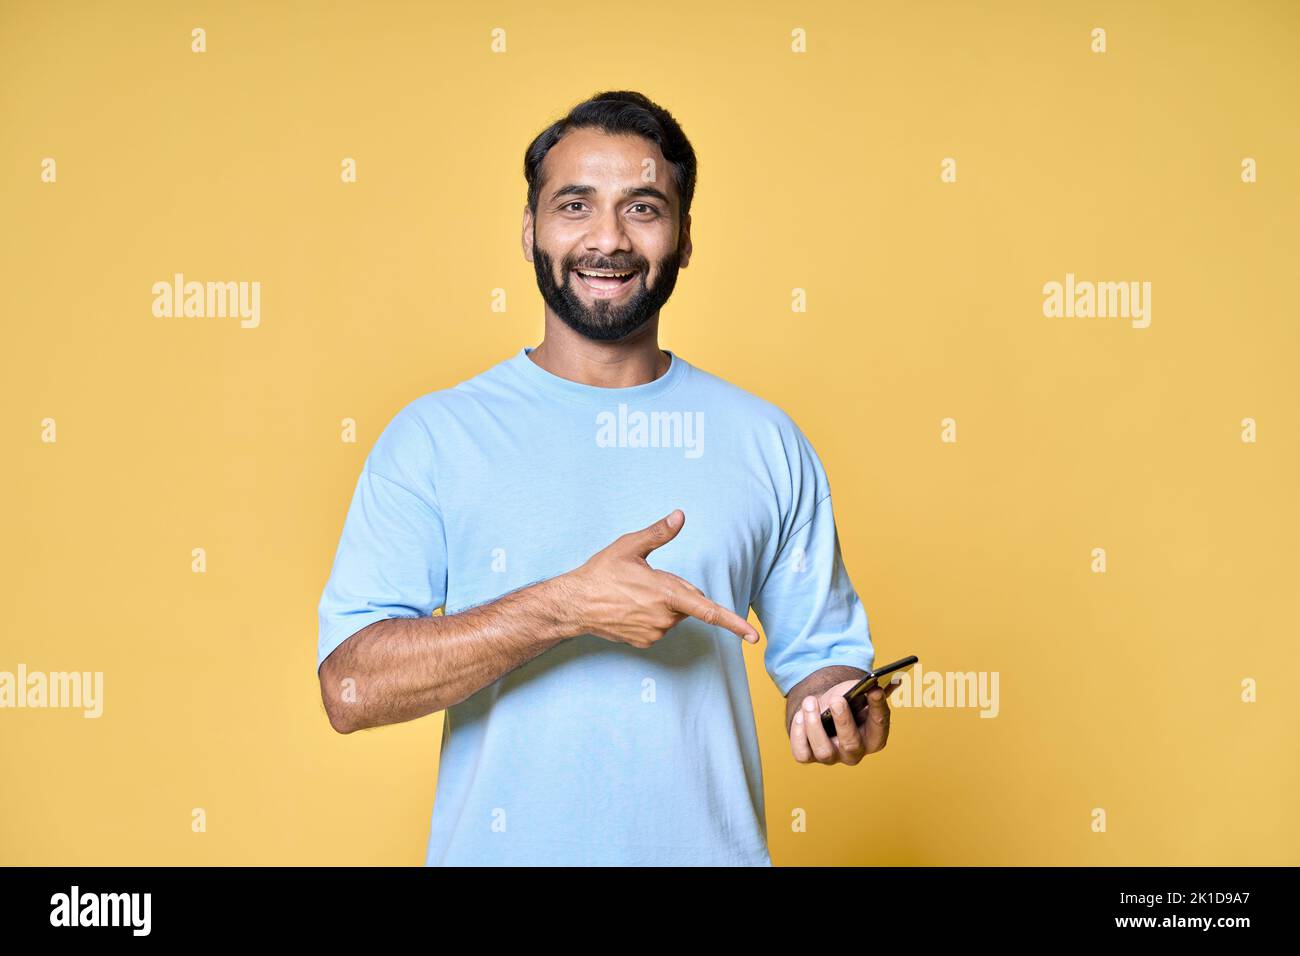 Happy indian man pointing at mobile phone isolated on yellow background. Stock Photo